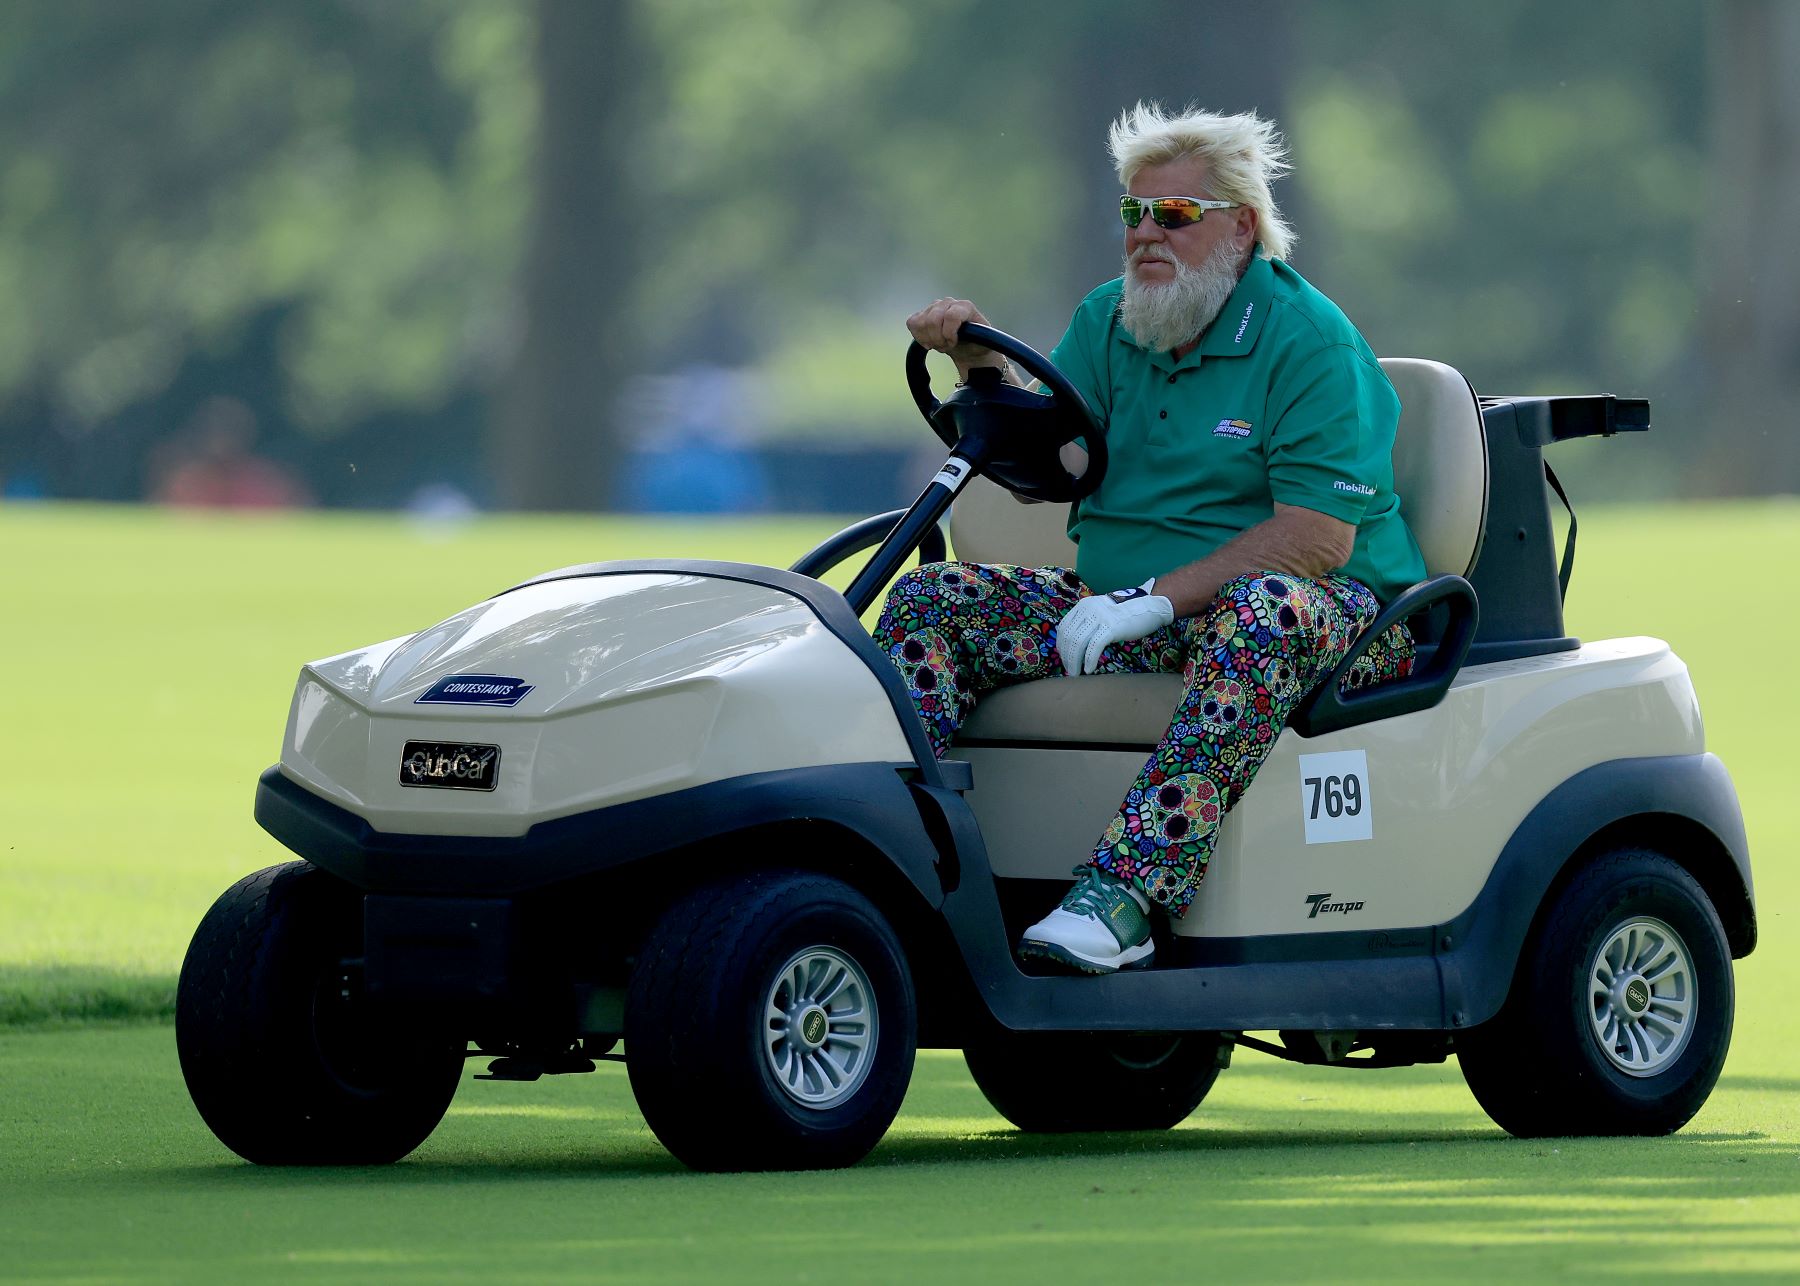 John Daly in a golf cart during the 2022 PGA Championship at the Southern Hills Country Club in Tulsa, Oklahoma